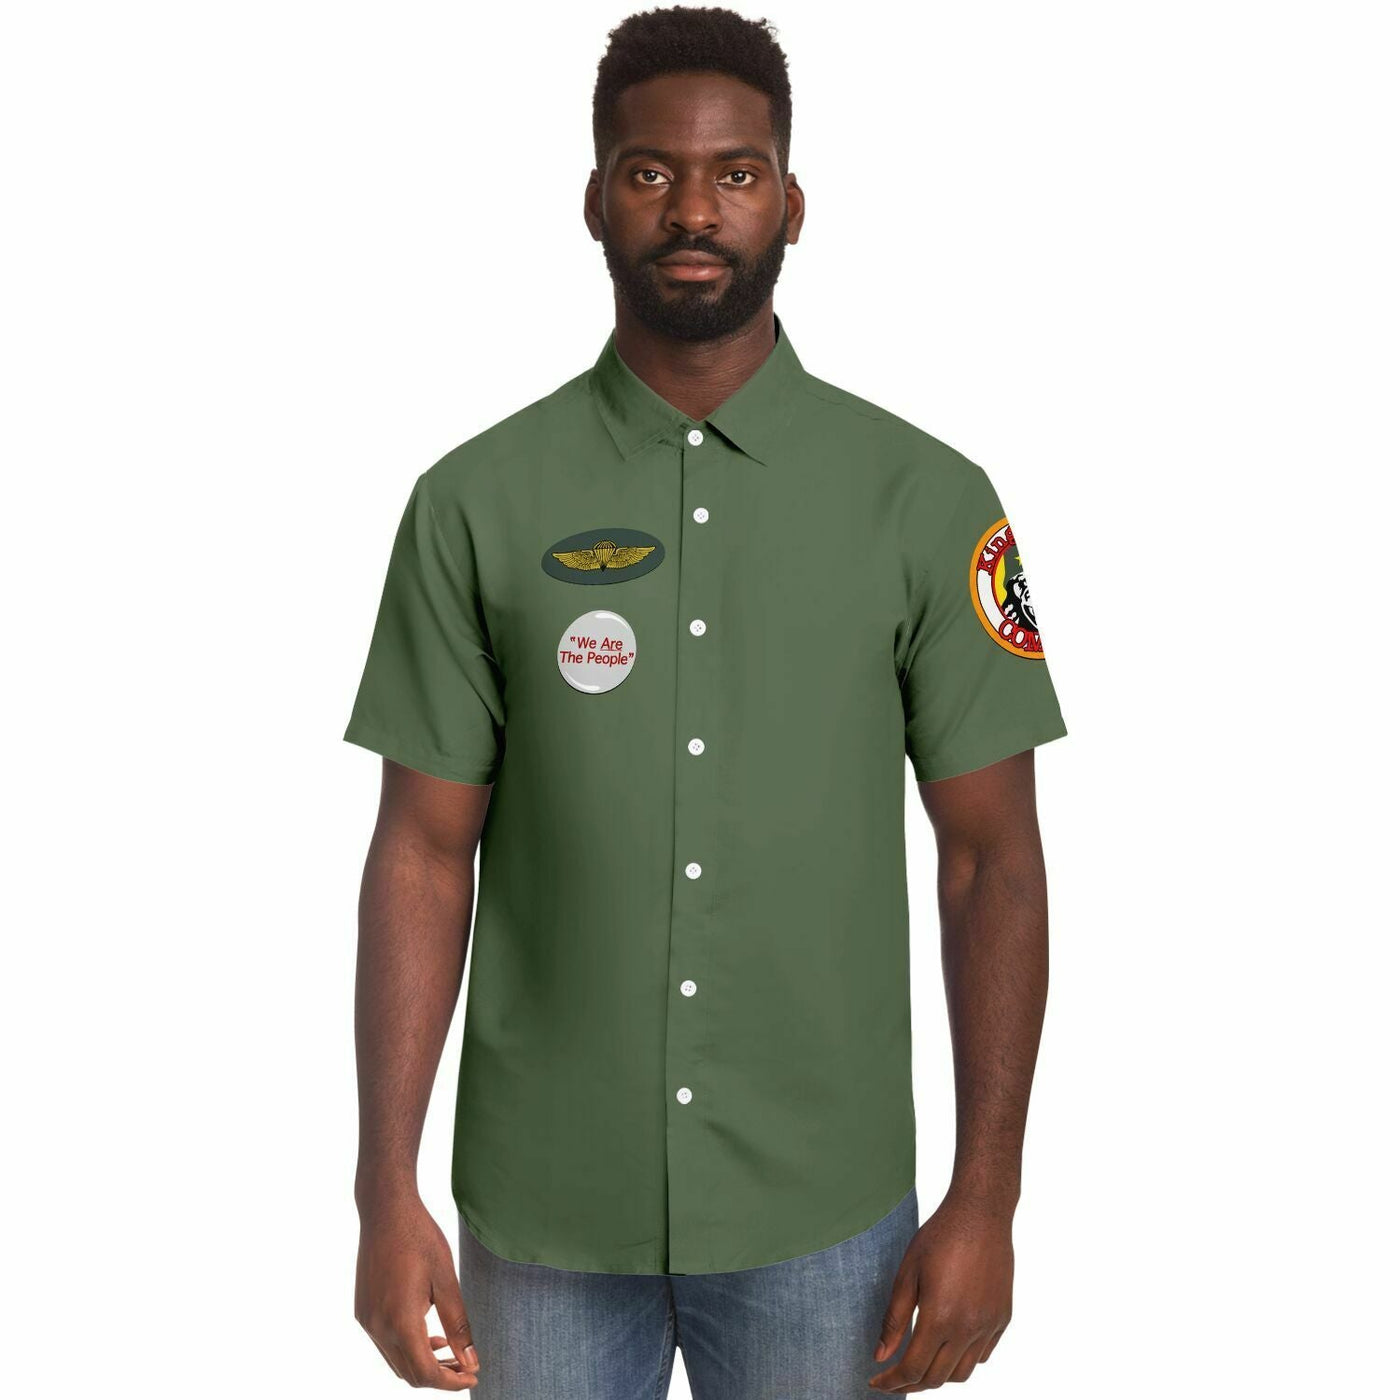 Taxi Driver - Travis Bickle | Military Punk Short Sleeves Shirt